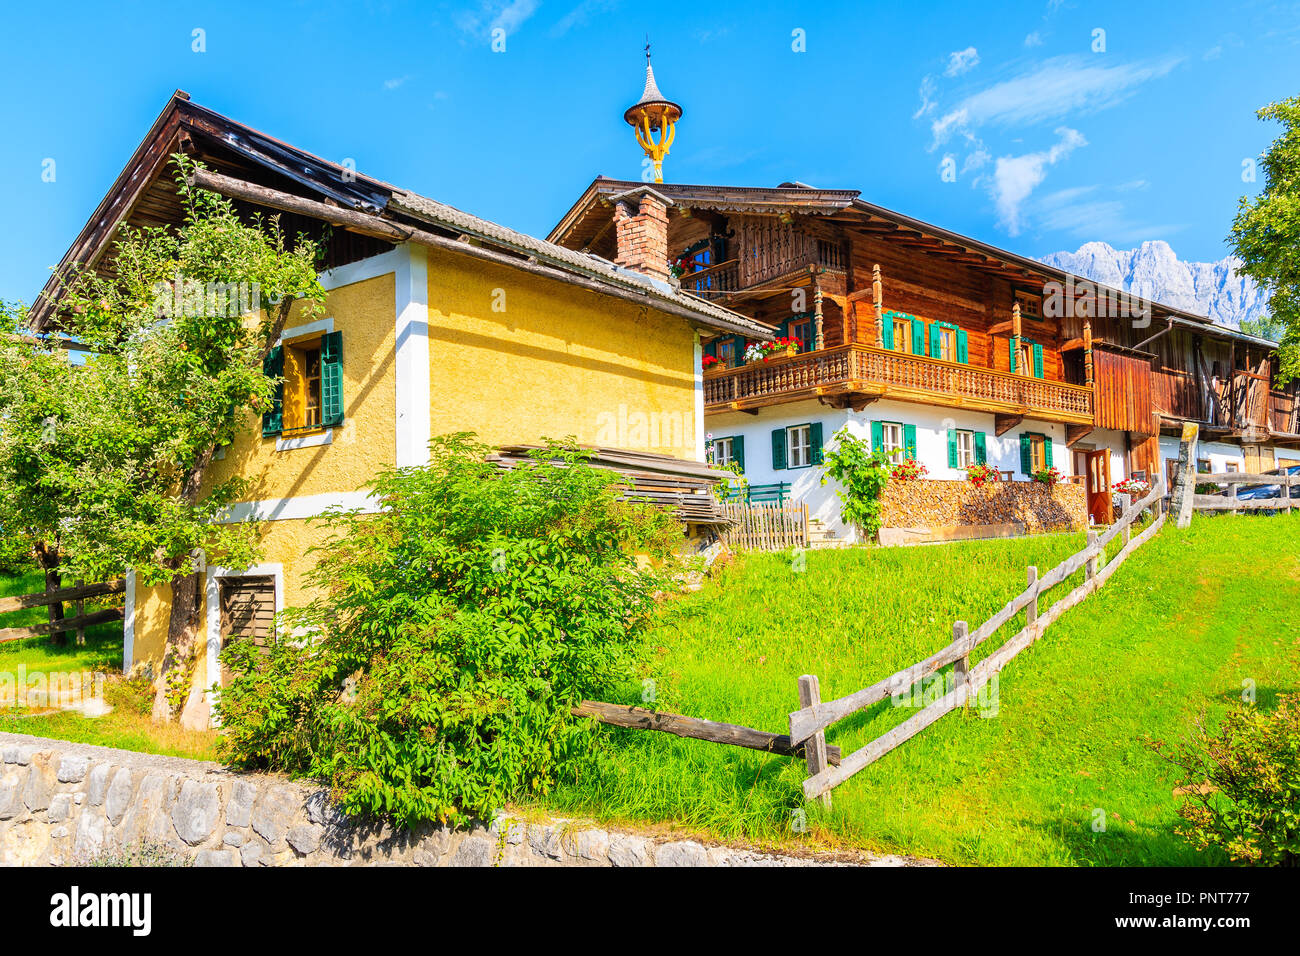 Typical wooden alpine houses on green meadow in Going am Wilden Kaiser village on sunny summer day, Tyrol, Austria Stock Photo